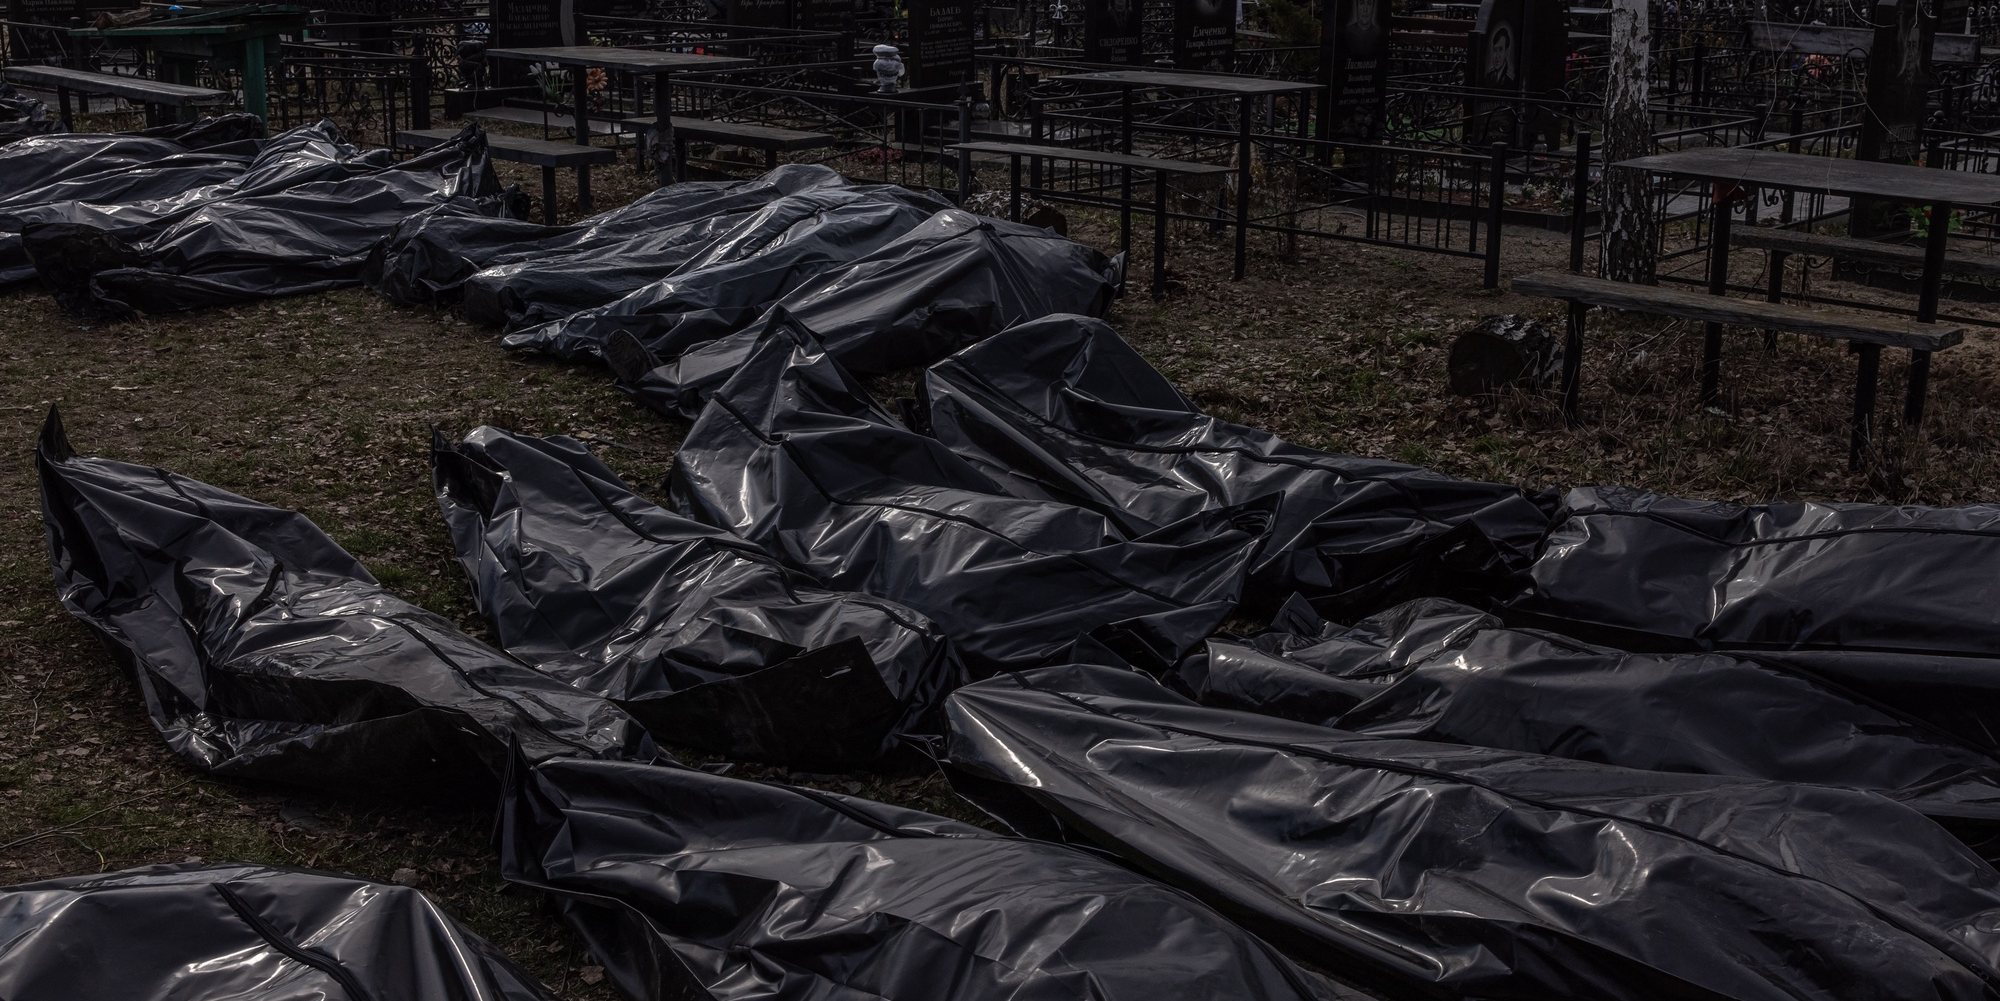 epa09877034 Bodies of killed people, which were brought to the cemetery, lay on the ground in body bags, in Bucha, northwest of Kyiv, Ukraine, 07 April 2022. Hundreds of tortured and killed civilians have been found in Bucha and other parts of the Kyiv region after the Russian army retreated from those areas. The growing evidence shows that the Russian forces are believed to be behind the atrocities when they were controlling the areas. Russian troops entered Ukraine on 24 February resulting in fighting and destruction in the country and triggering a series of severe economic sanctions on Russia by Western countries.  EPA/ROMAN PILIPEY